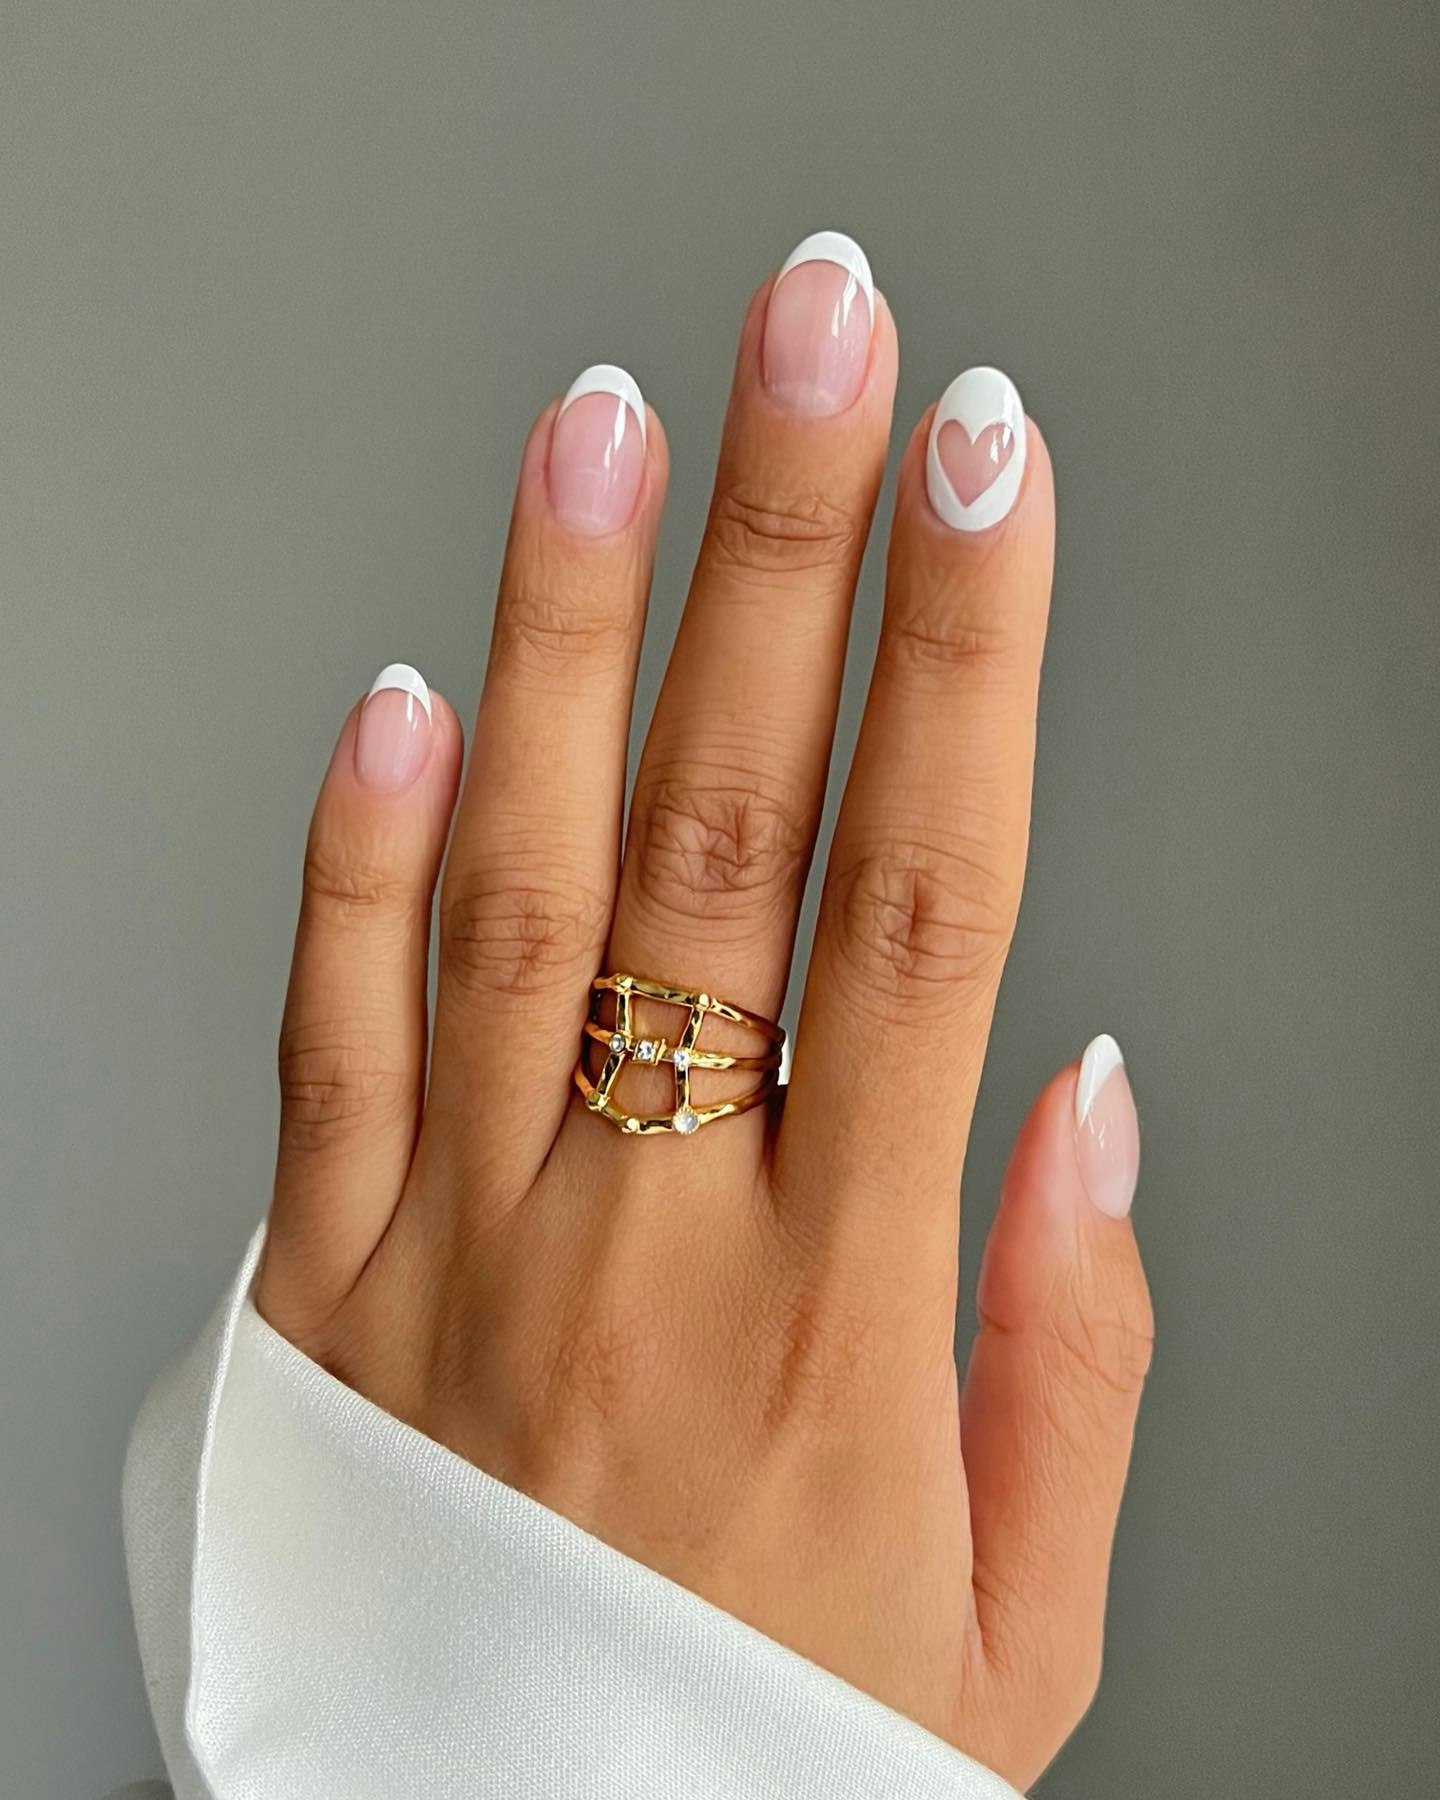 The French Love Heart Wedding Manicure